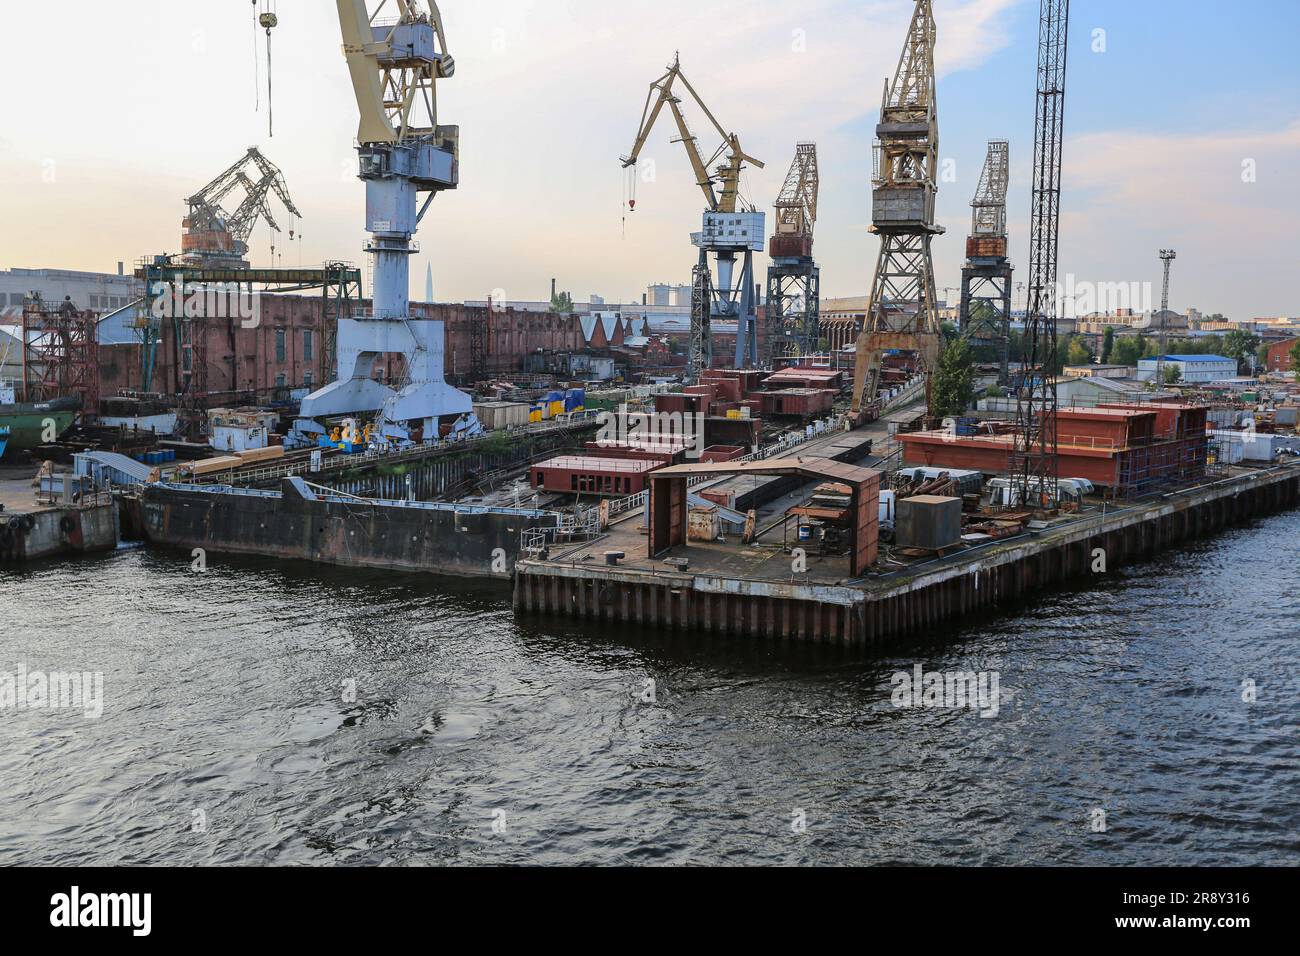 Russian icebreaker Ural (Урал), world's largest & most powerful nuclear powered icebreakers under construction, Baltic Shipyard drydock, St Petersburg Stock Photo